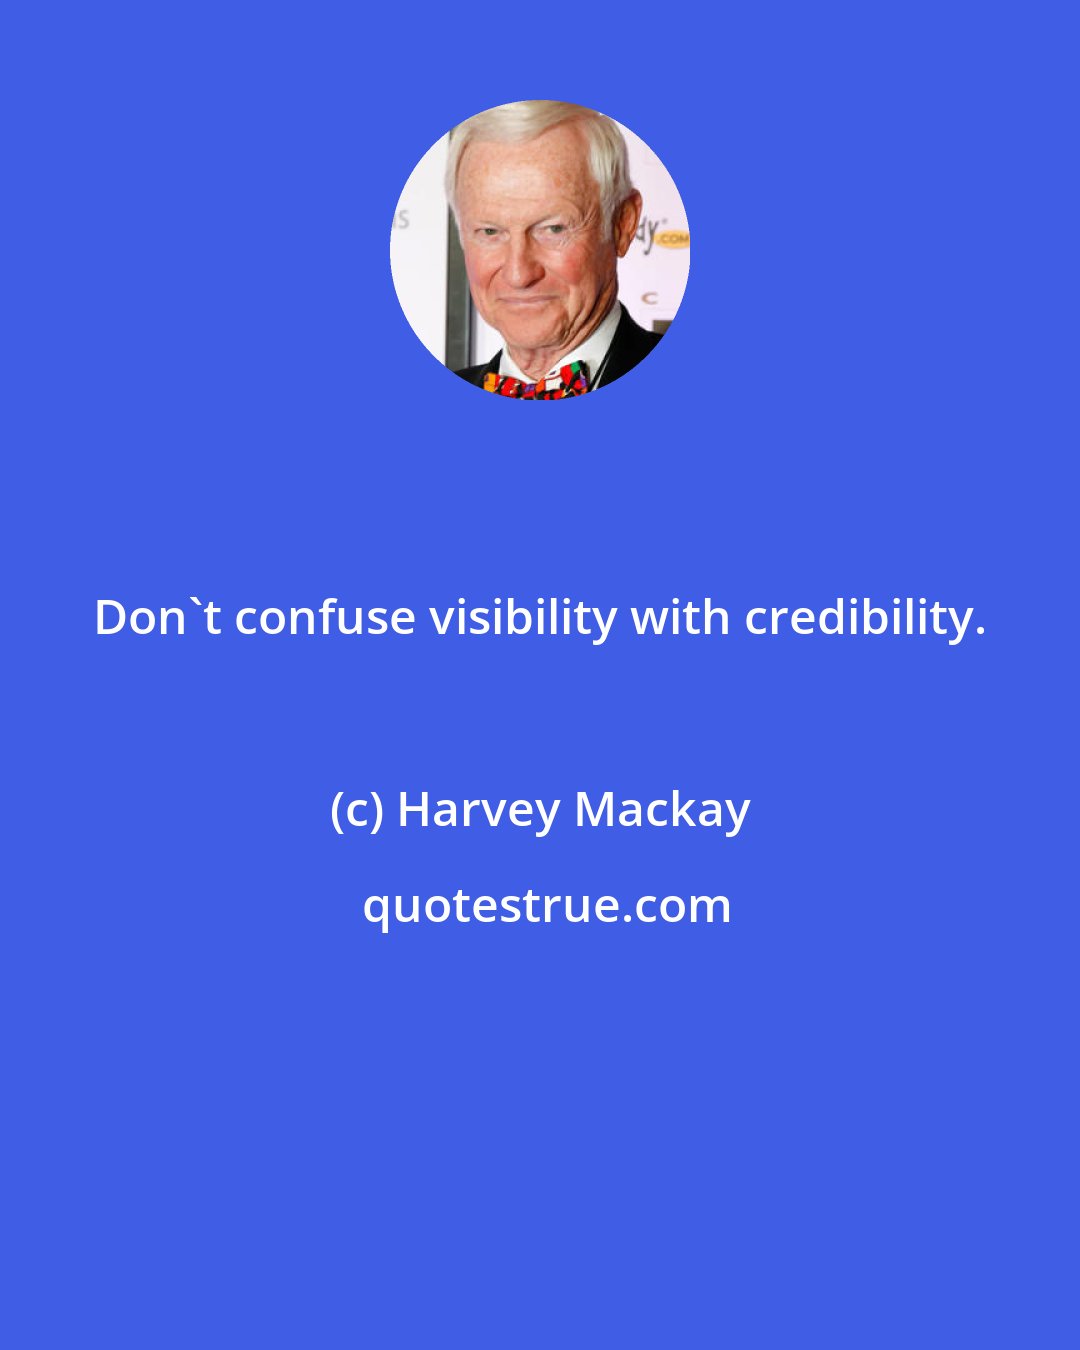 Harvey Mackay: Don't confuse visibility with credibility.